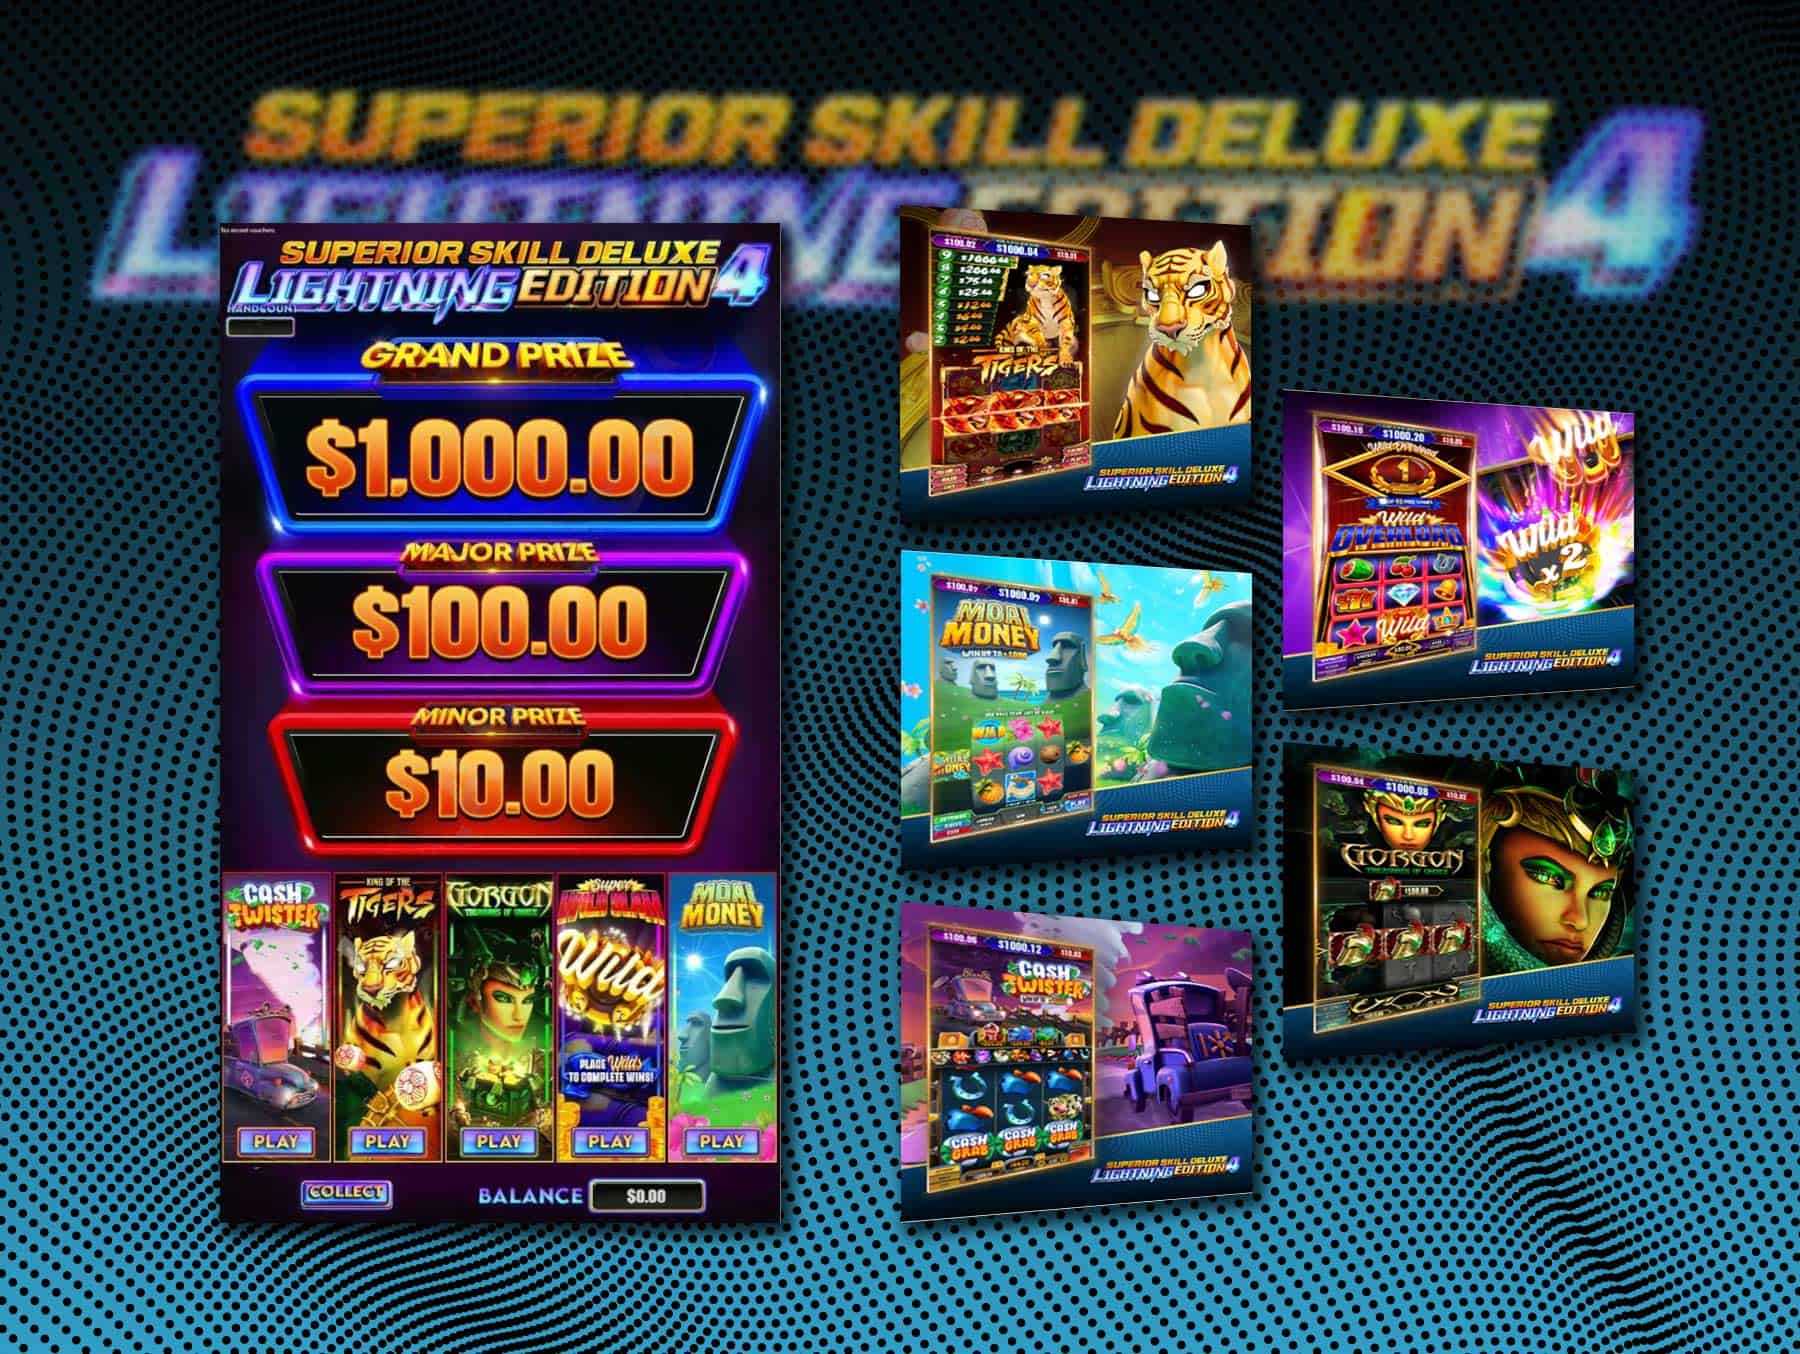 8 Line Supply Superior Skill Deluxe Lightning Edition 4 Multi Game